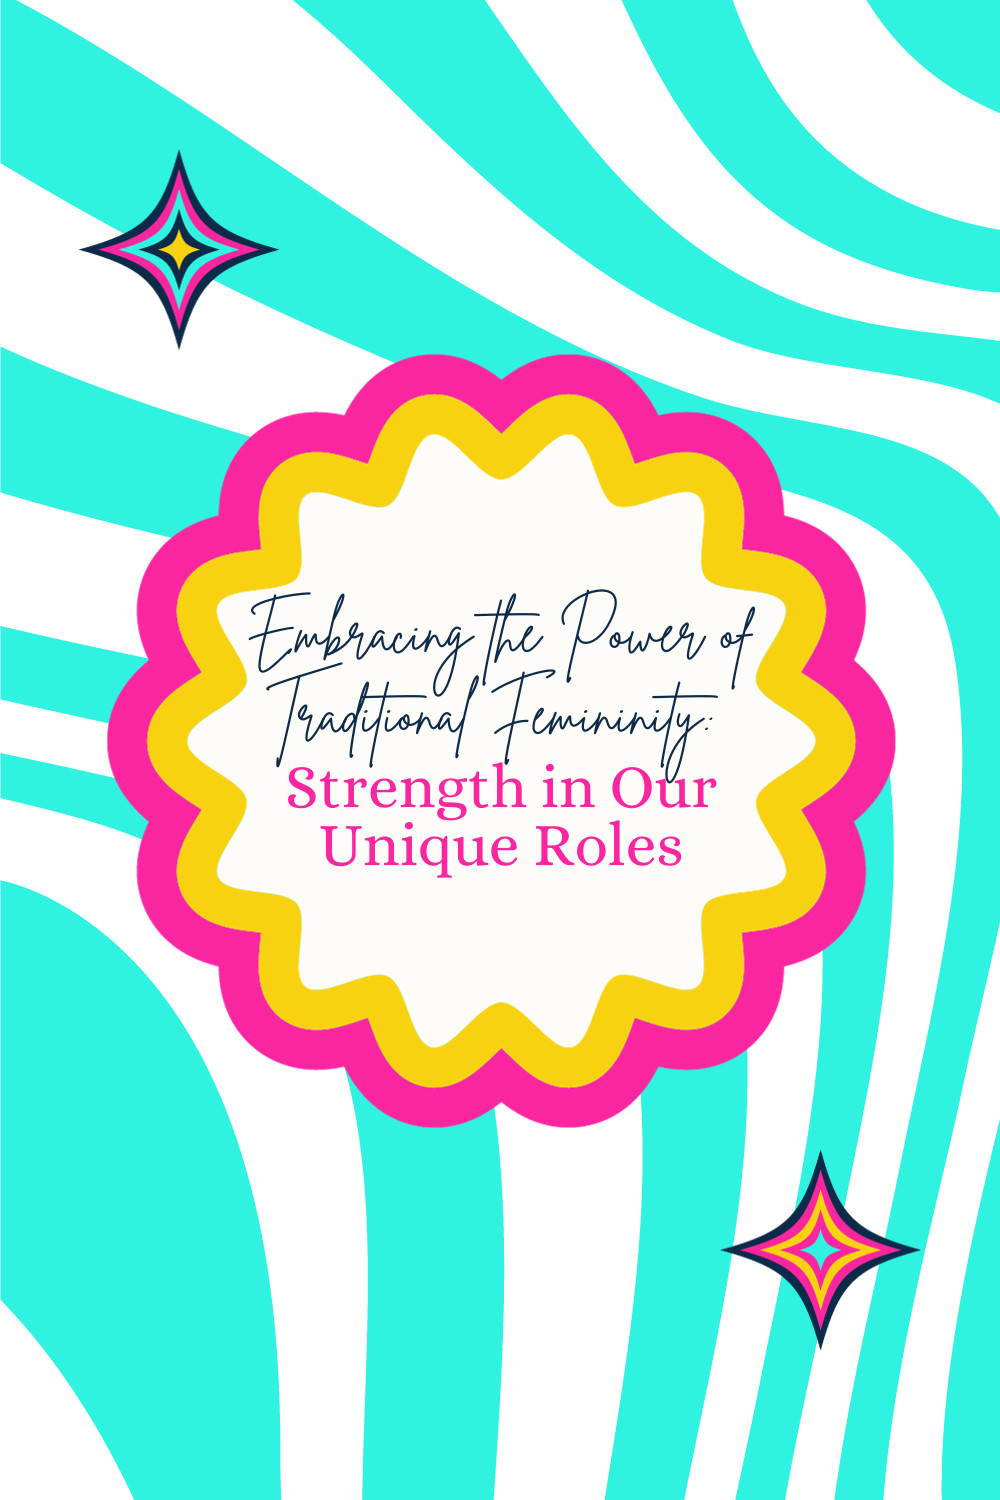 Embracing the Power of Traditional Femininity: Strength in Our Unique Roles